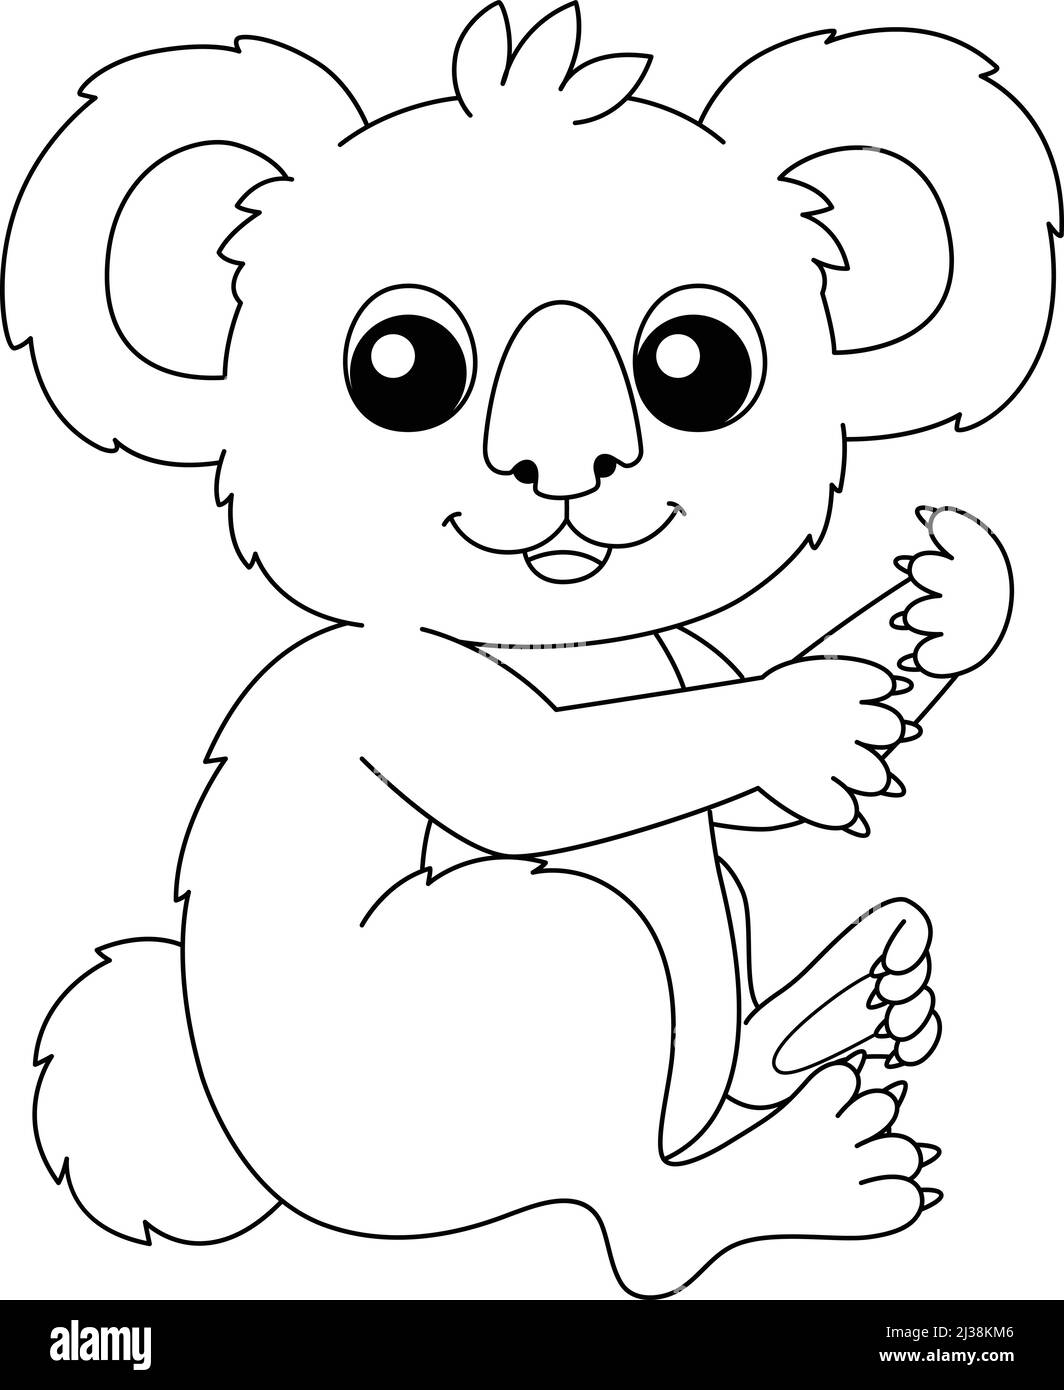 Koala Animal Coloring Page Isolated for Kids Stock Vector Image ...